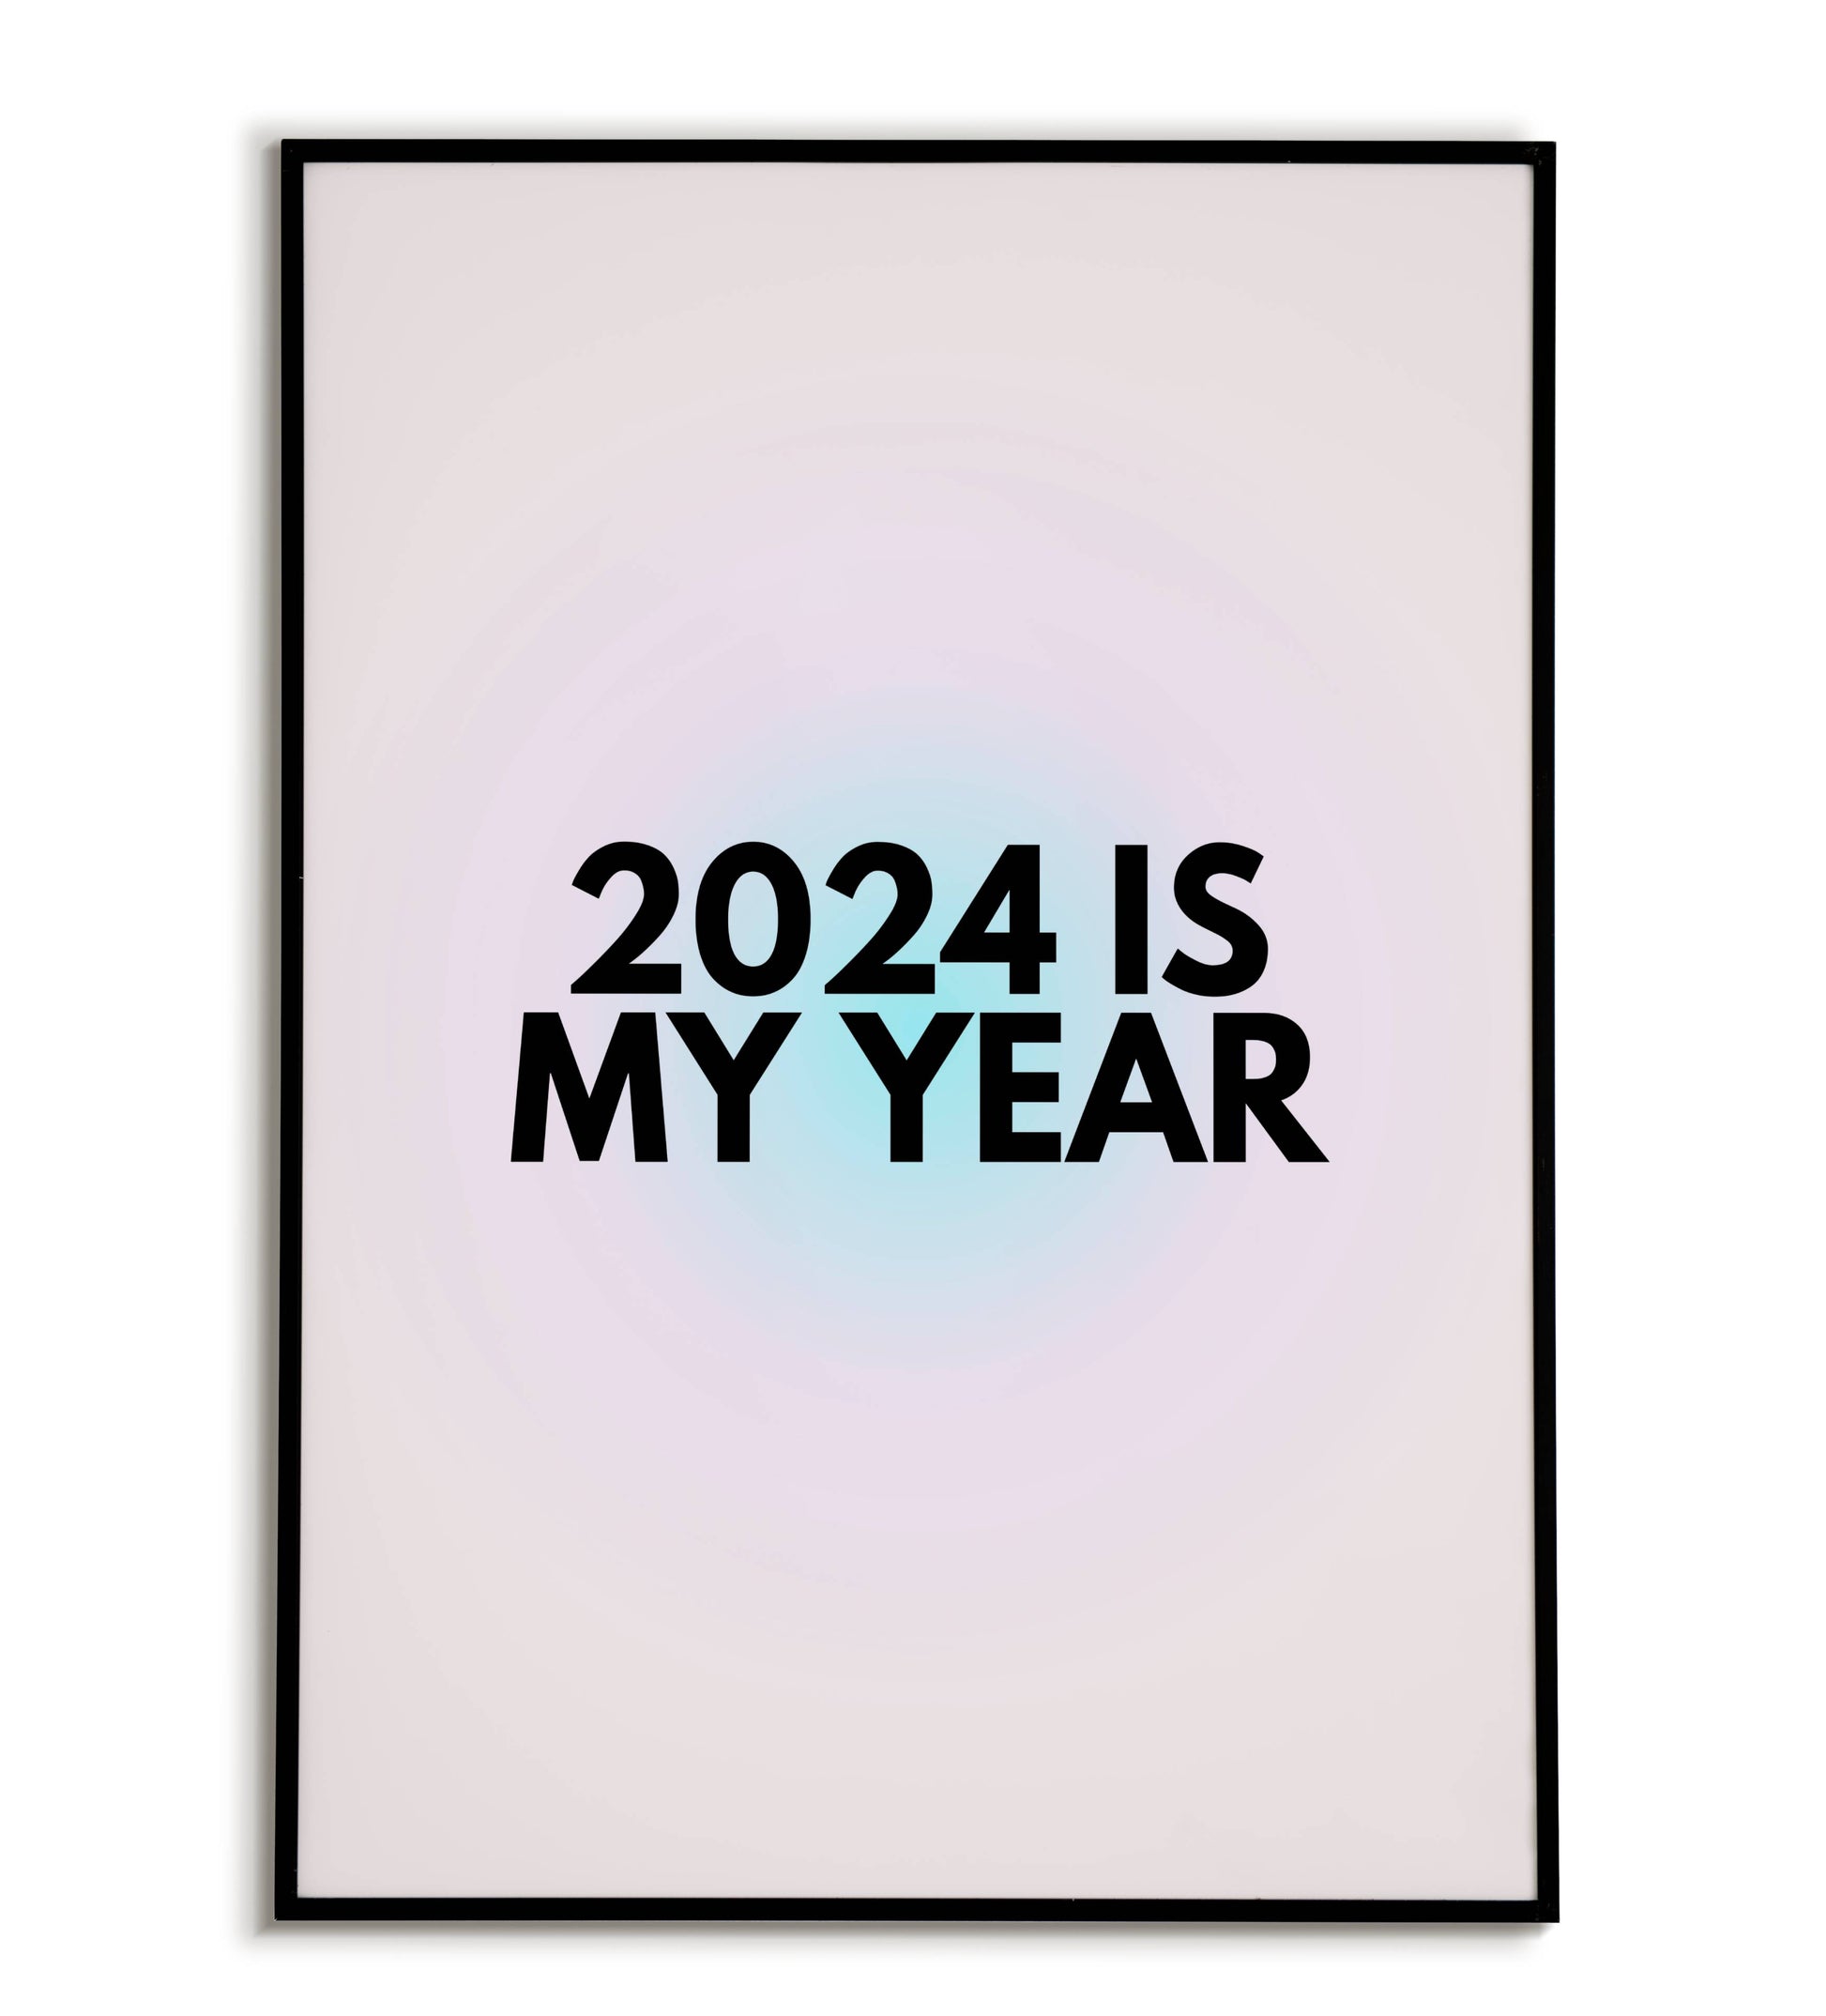 "2024 Is My Year" printable motivational poster.